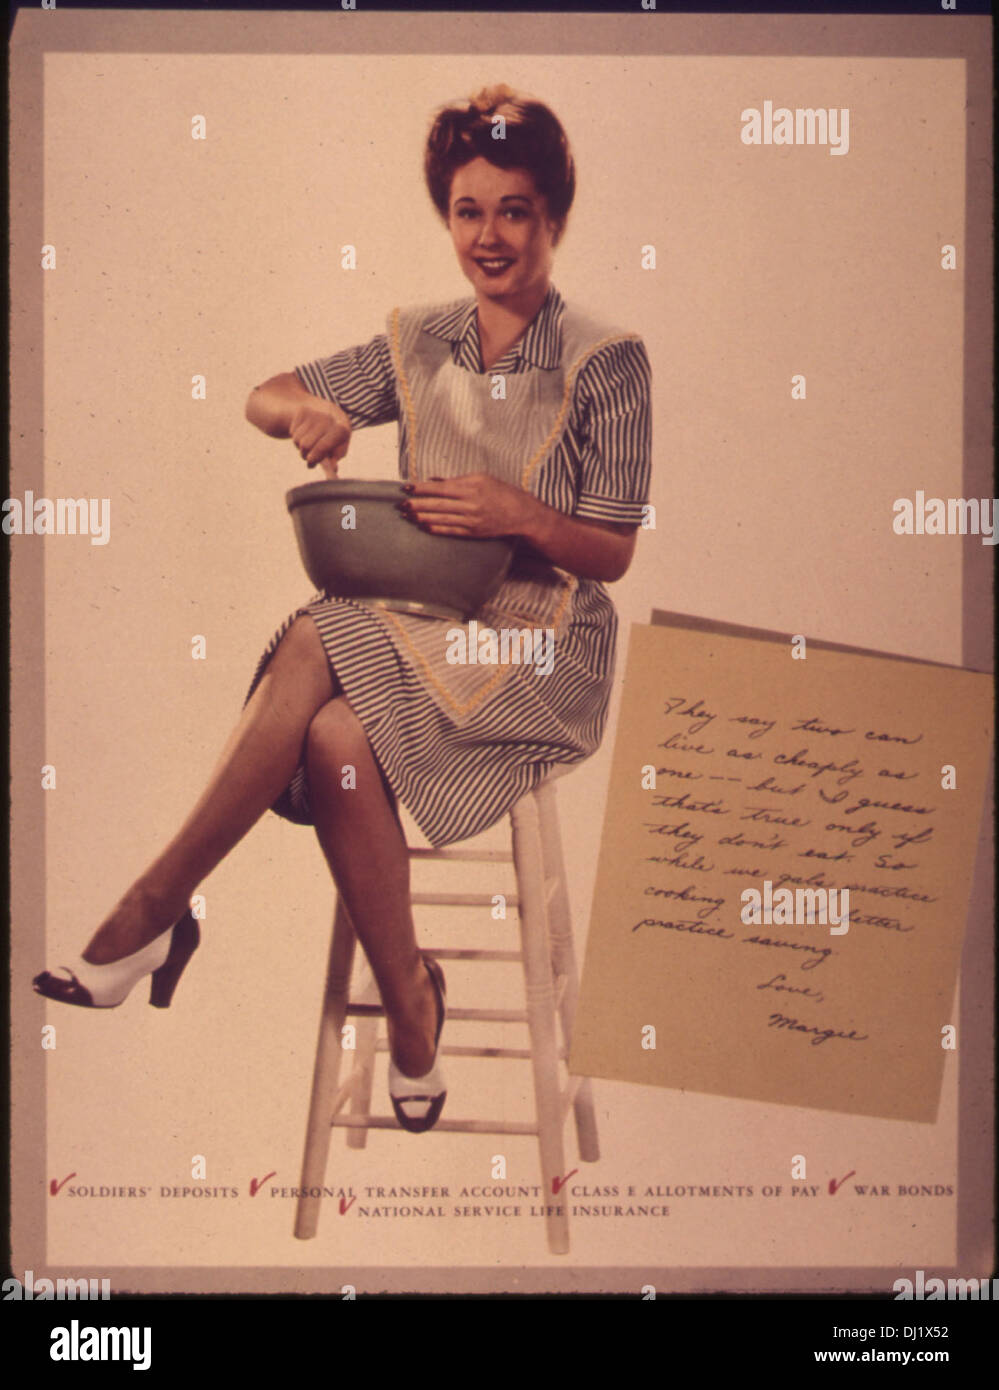 Margie poster no.7 - Letters to soldiers concerning soldiers' deposits, Personal transfer account, Class E... 981 Stock Photo